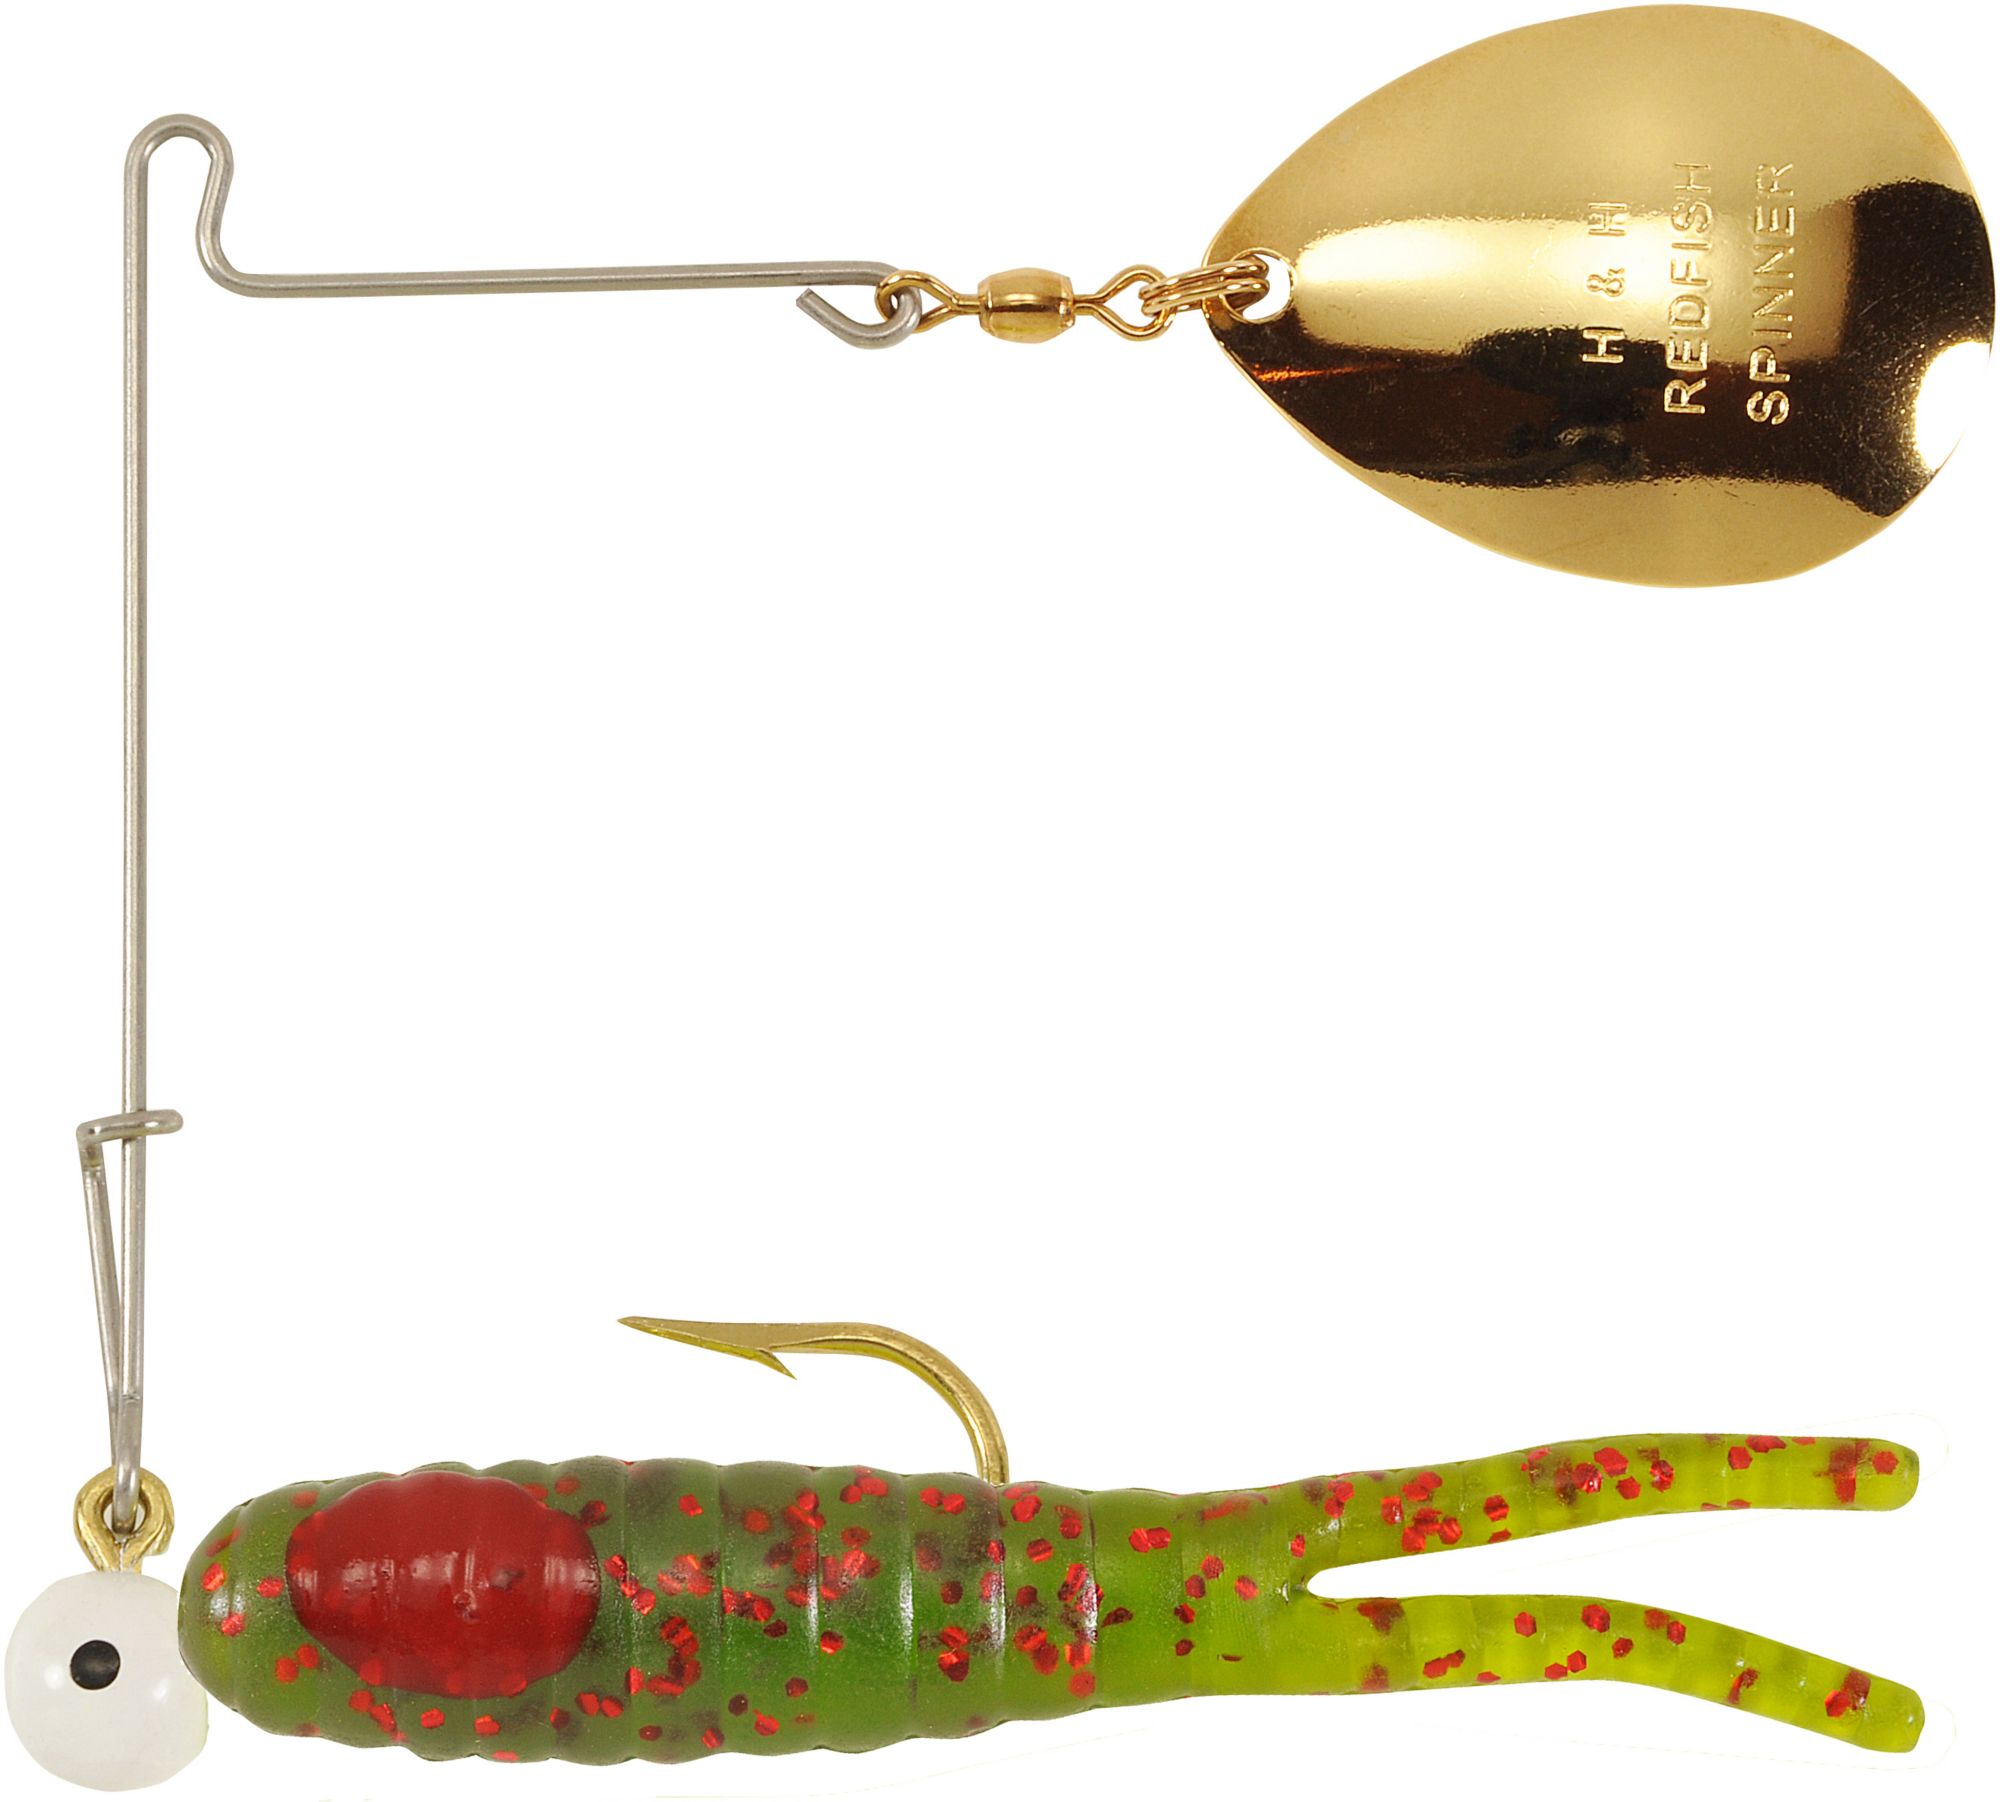 Dick's Sporting Goods H&H Sparkle Beetle Jig Spin